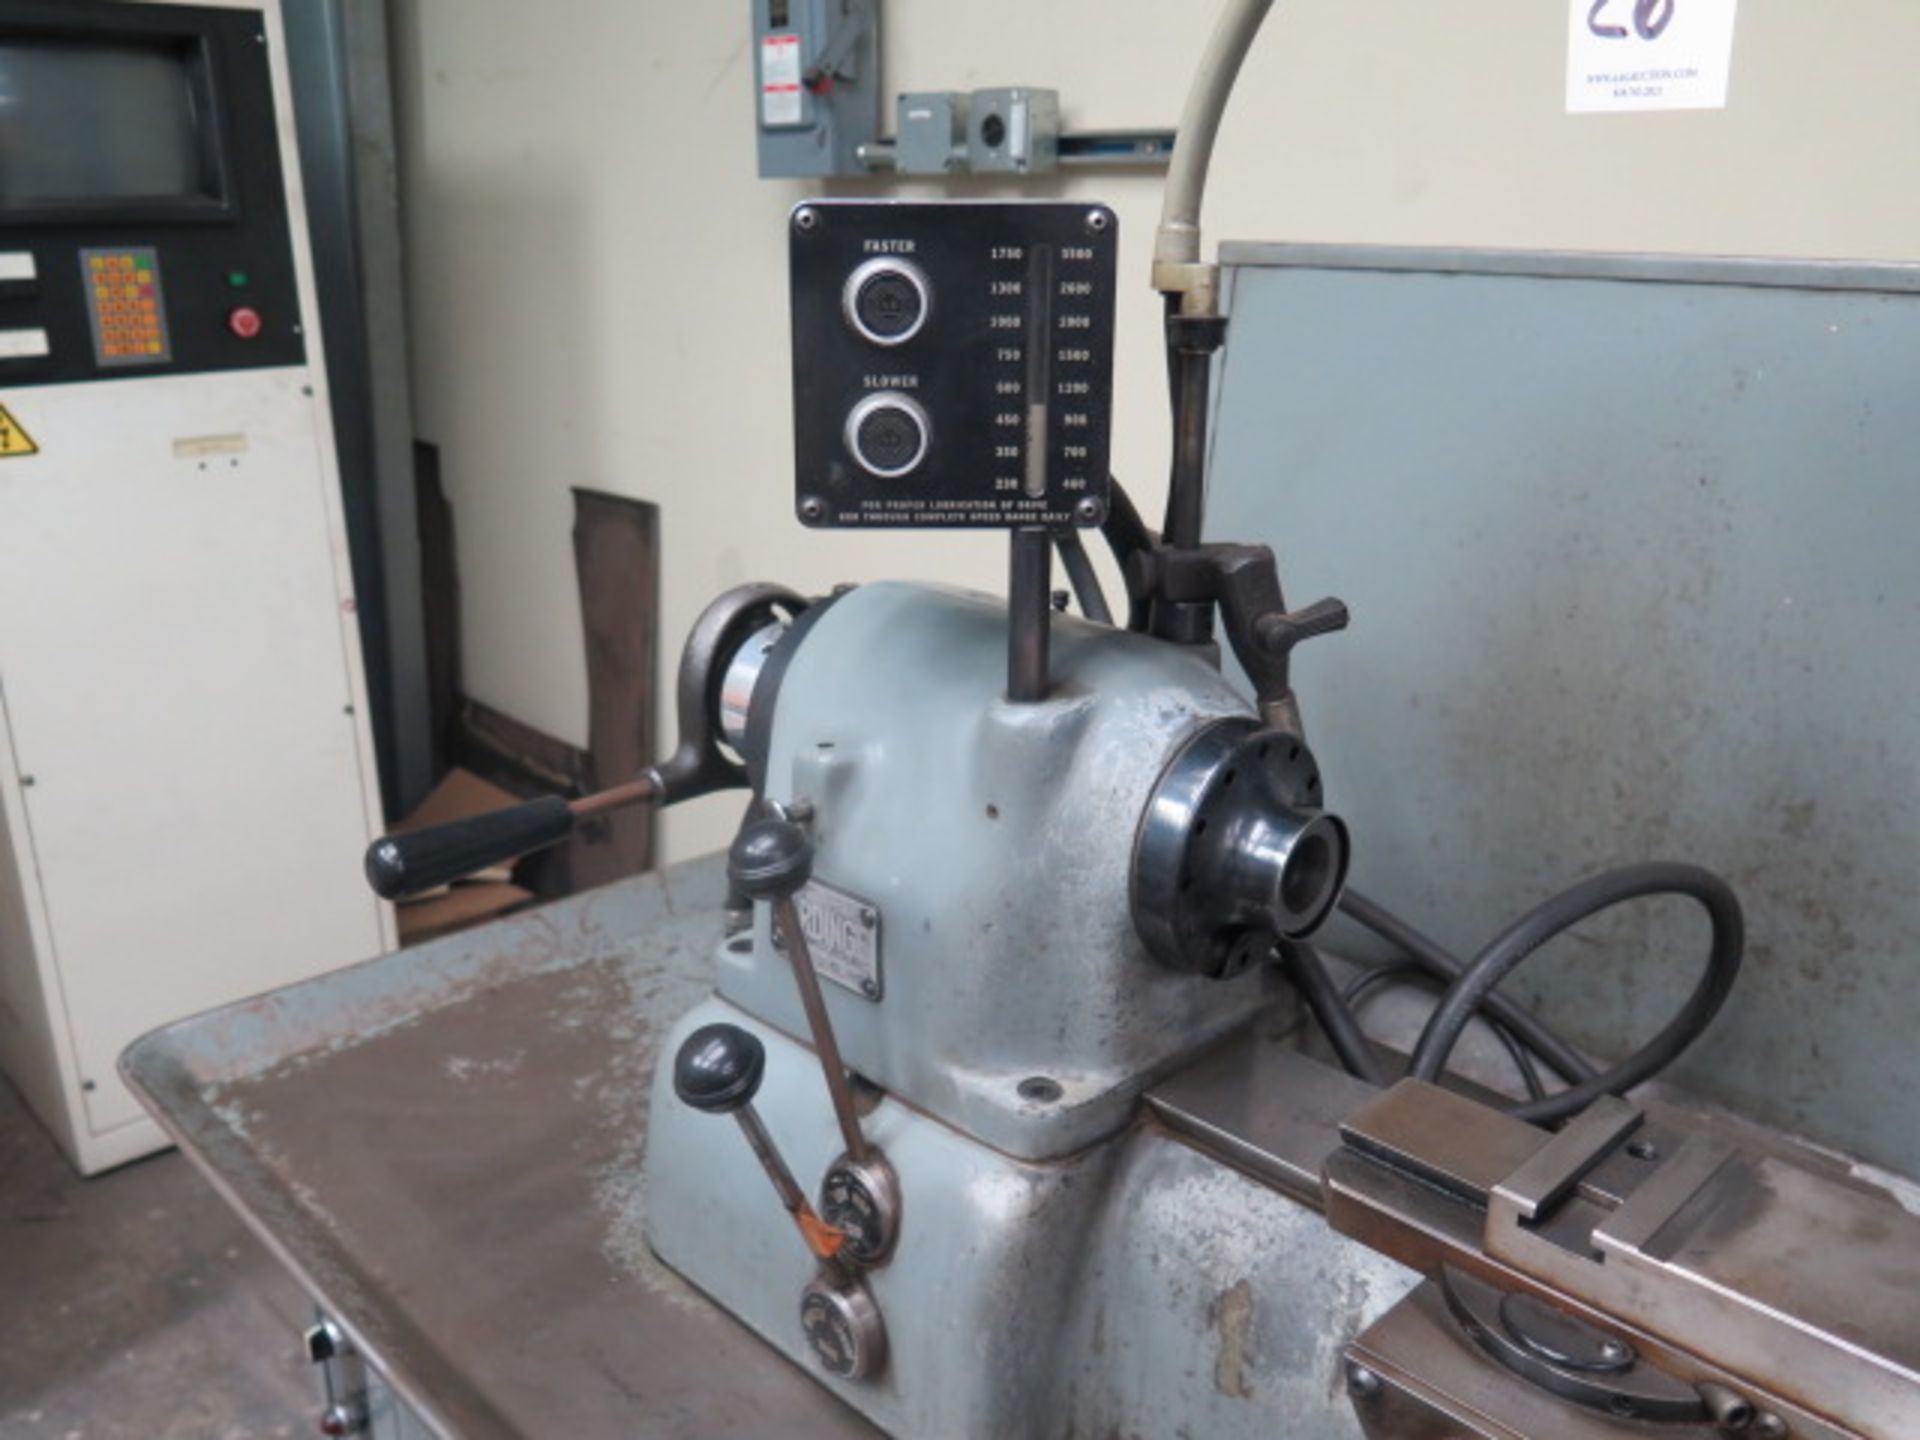 Hardinge DSM-59 Narrow Bed Second OP Lathe s/n DV-59-14302 w/ 230-3500 RPM, 5C Spindle, SOLD AS IS - Image 4 of 9